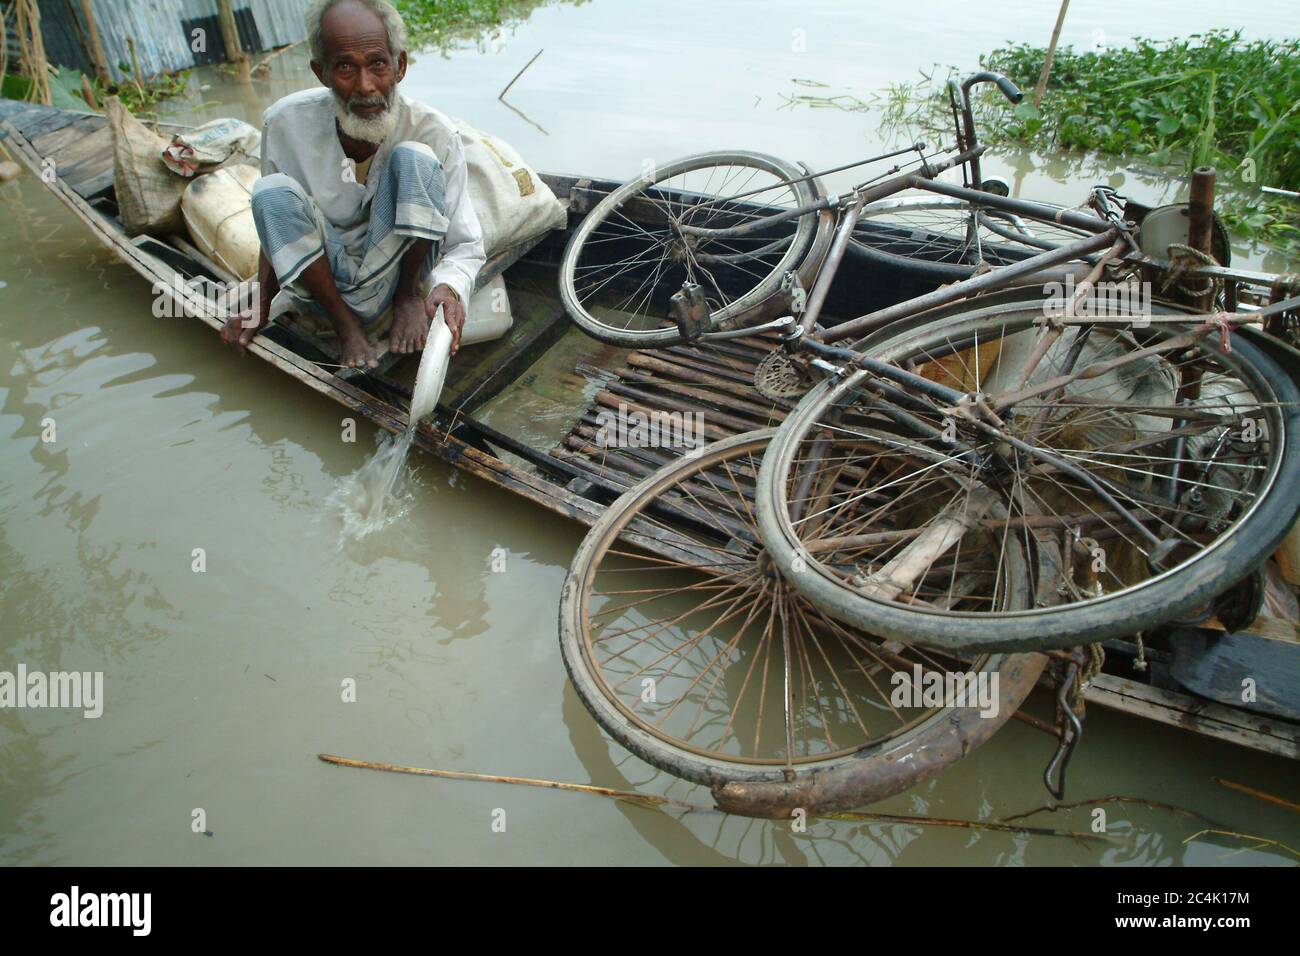 An old man bailing water from a boat in the flood affected area. Gaibandha, Bangladesh. July 21, 2004. Stock Photo